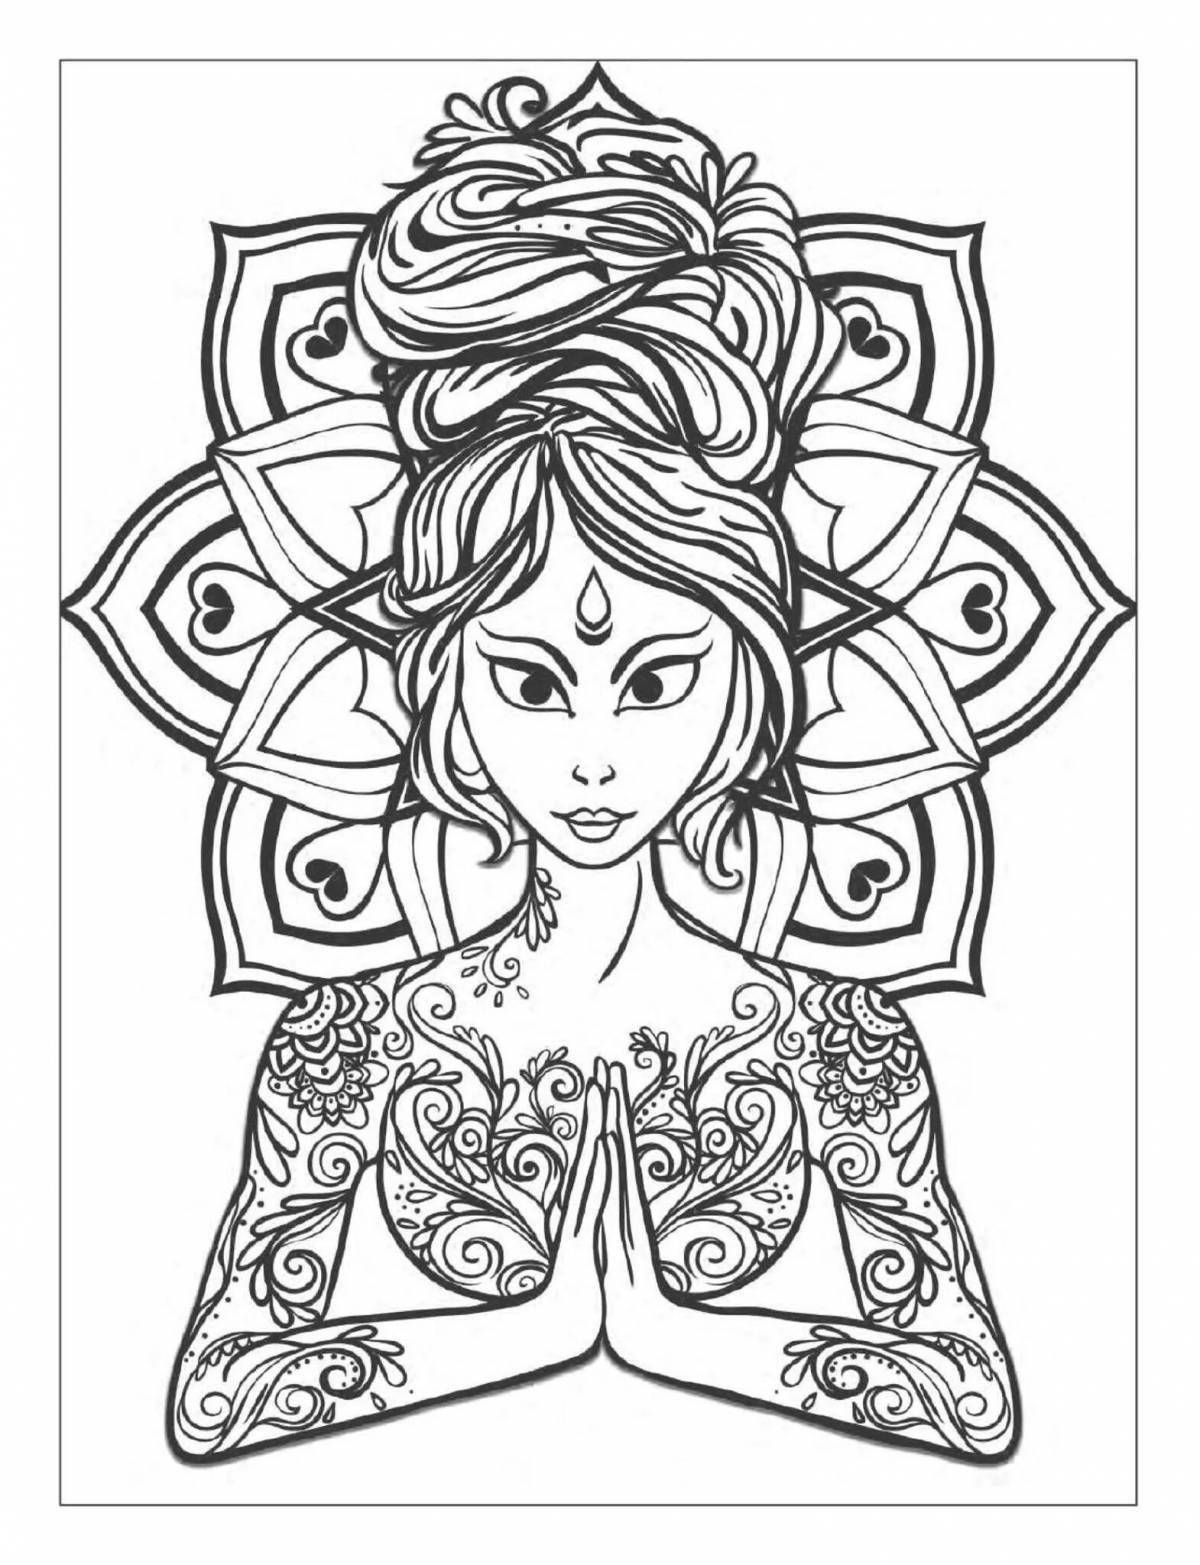 Inviting anti-stress coloring pages for women